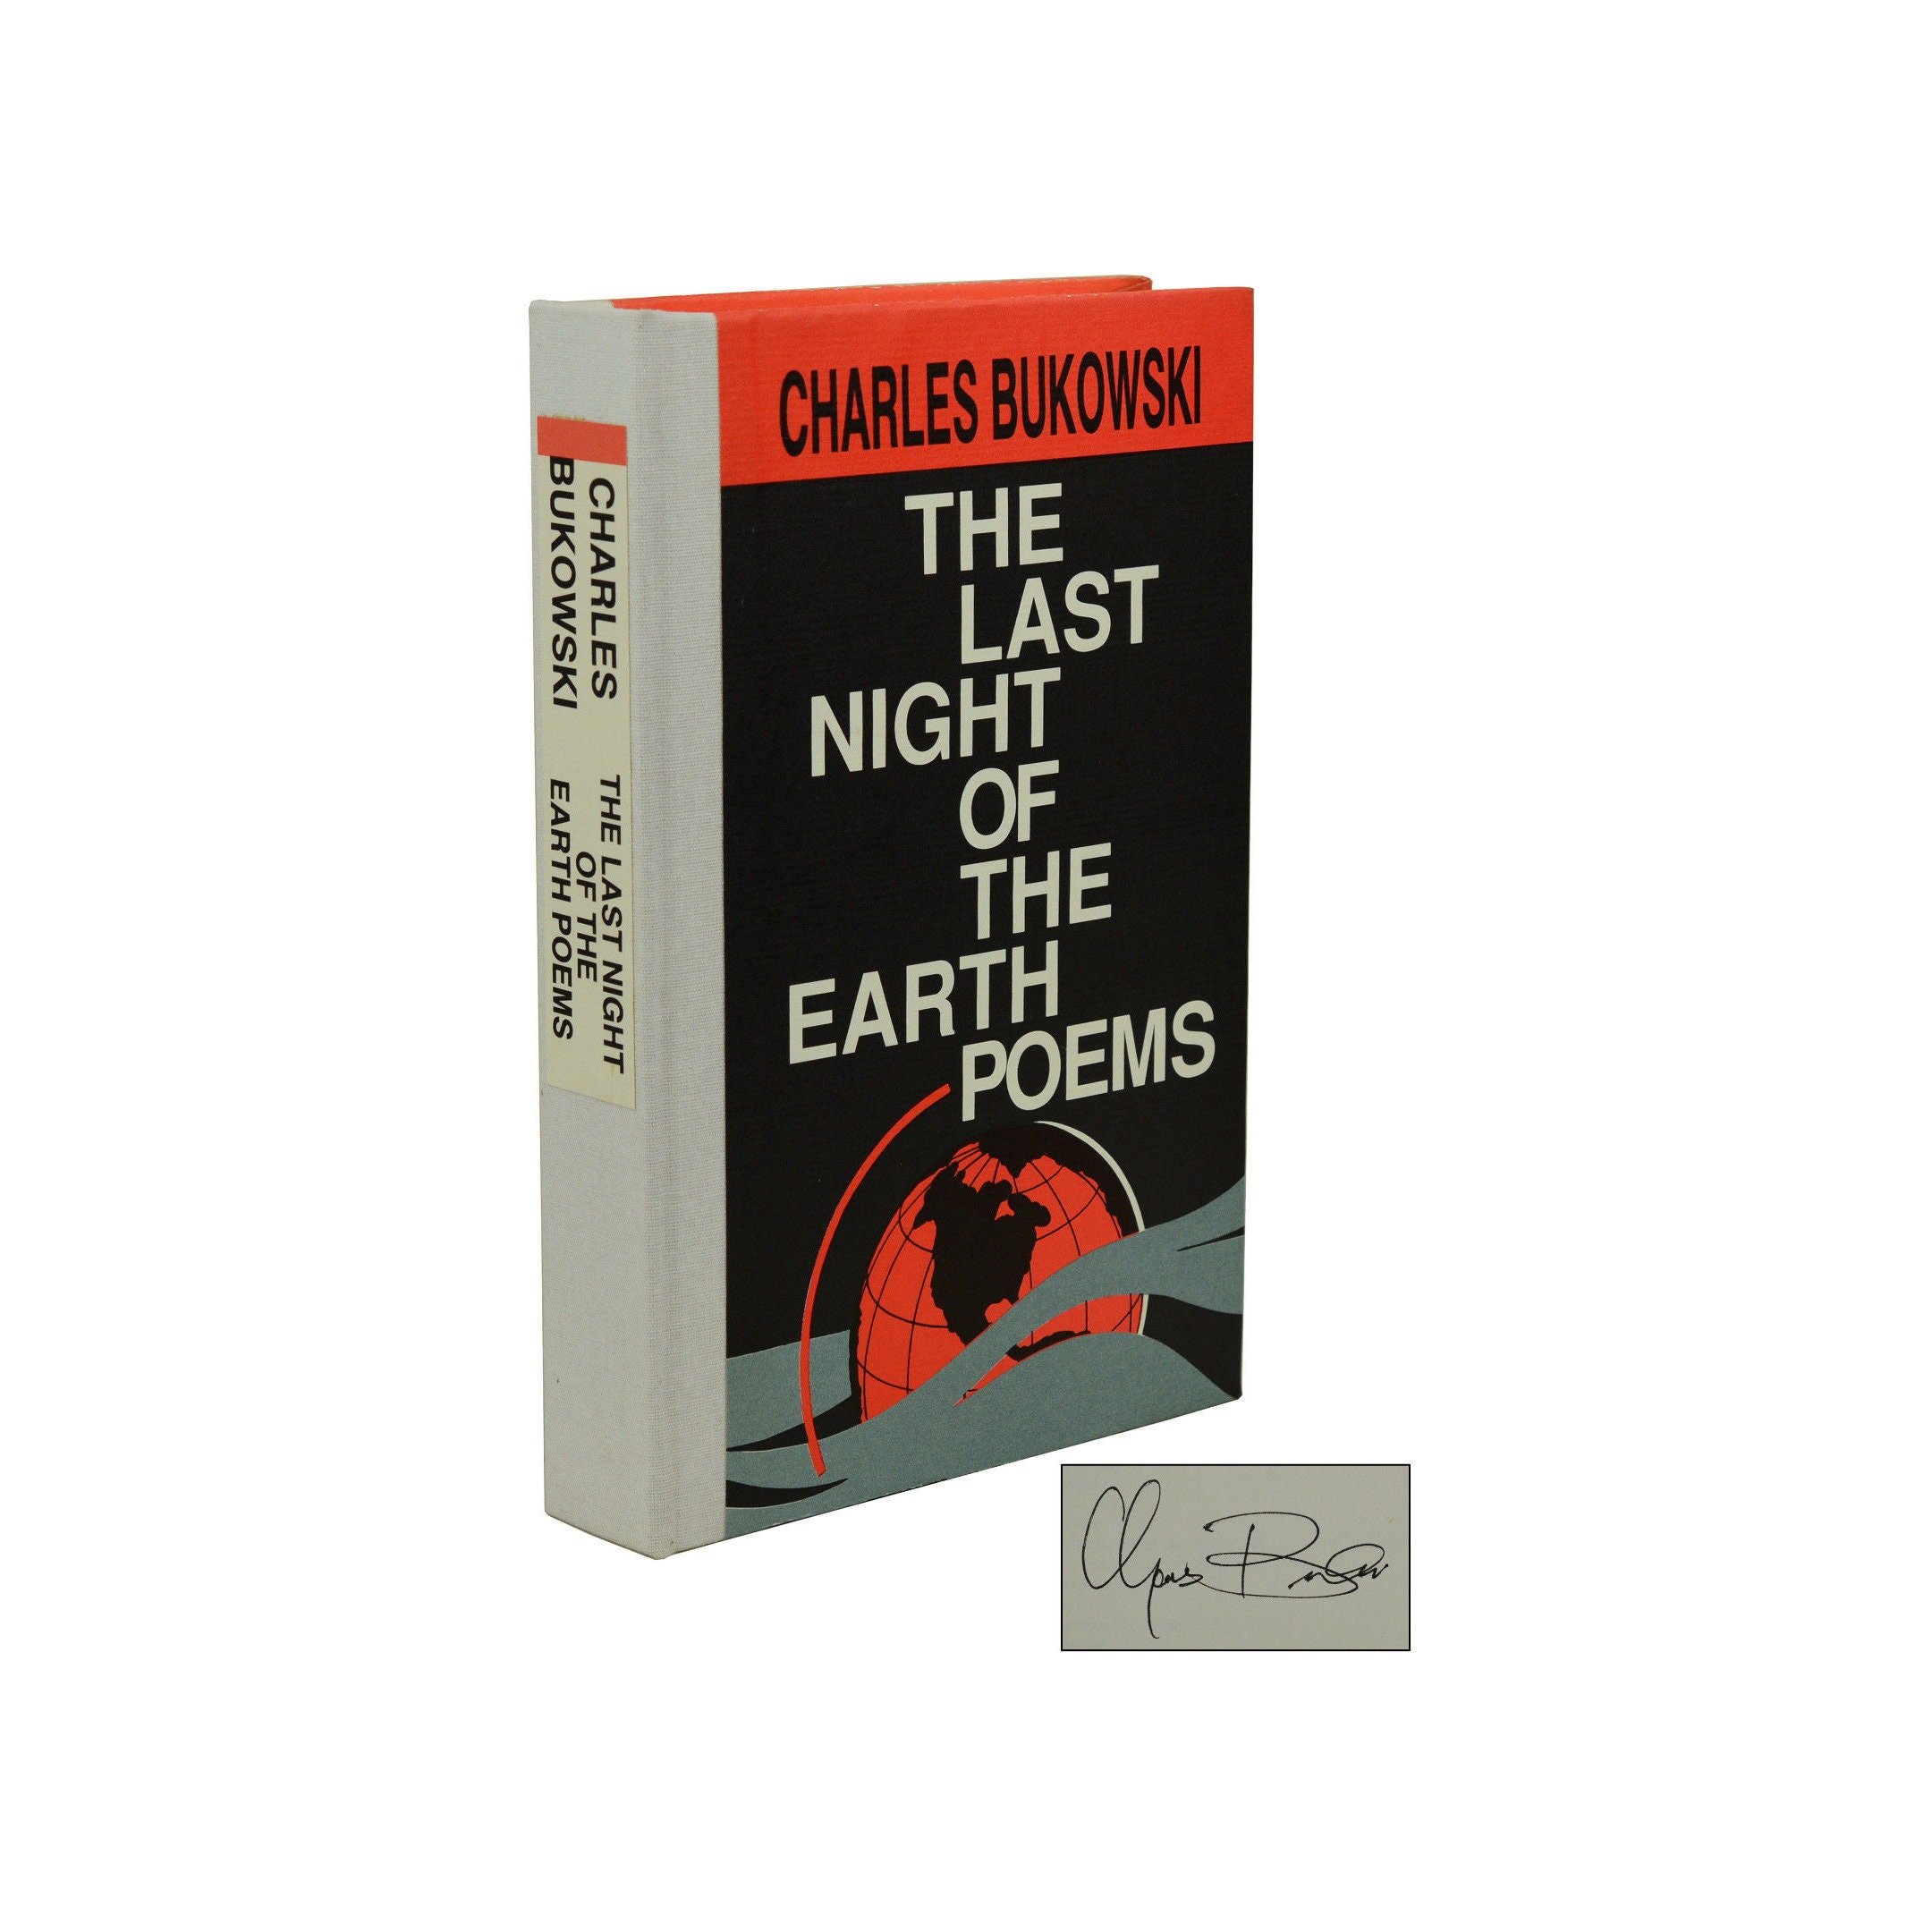 The Last Night of the Earth Poems CHARLES BUKOWSKI Signed Etsy 日本